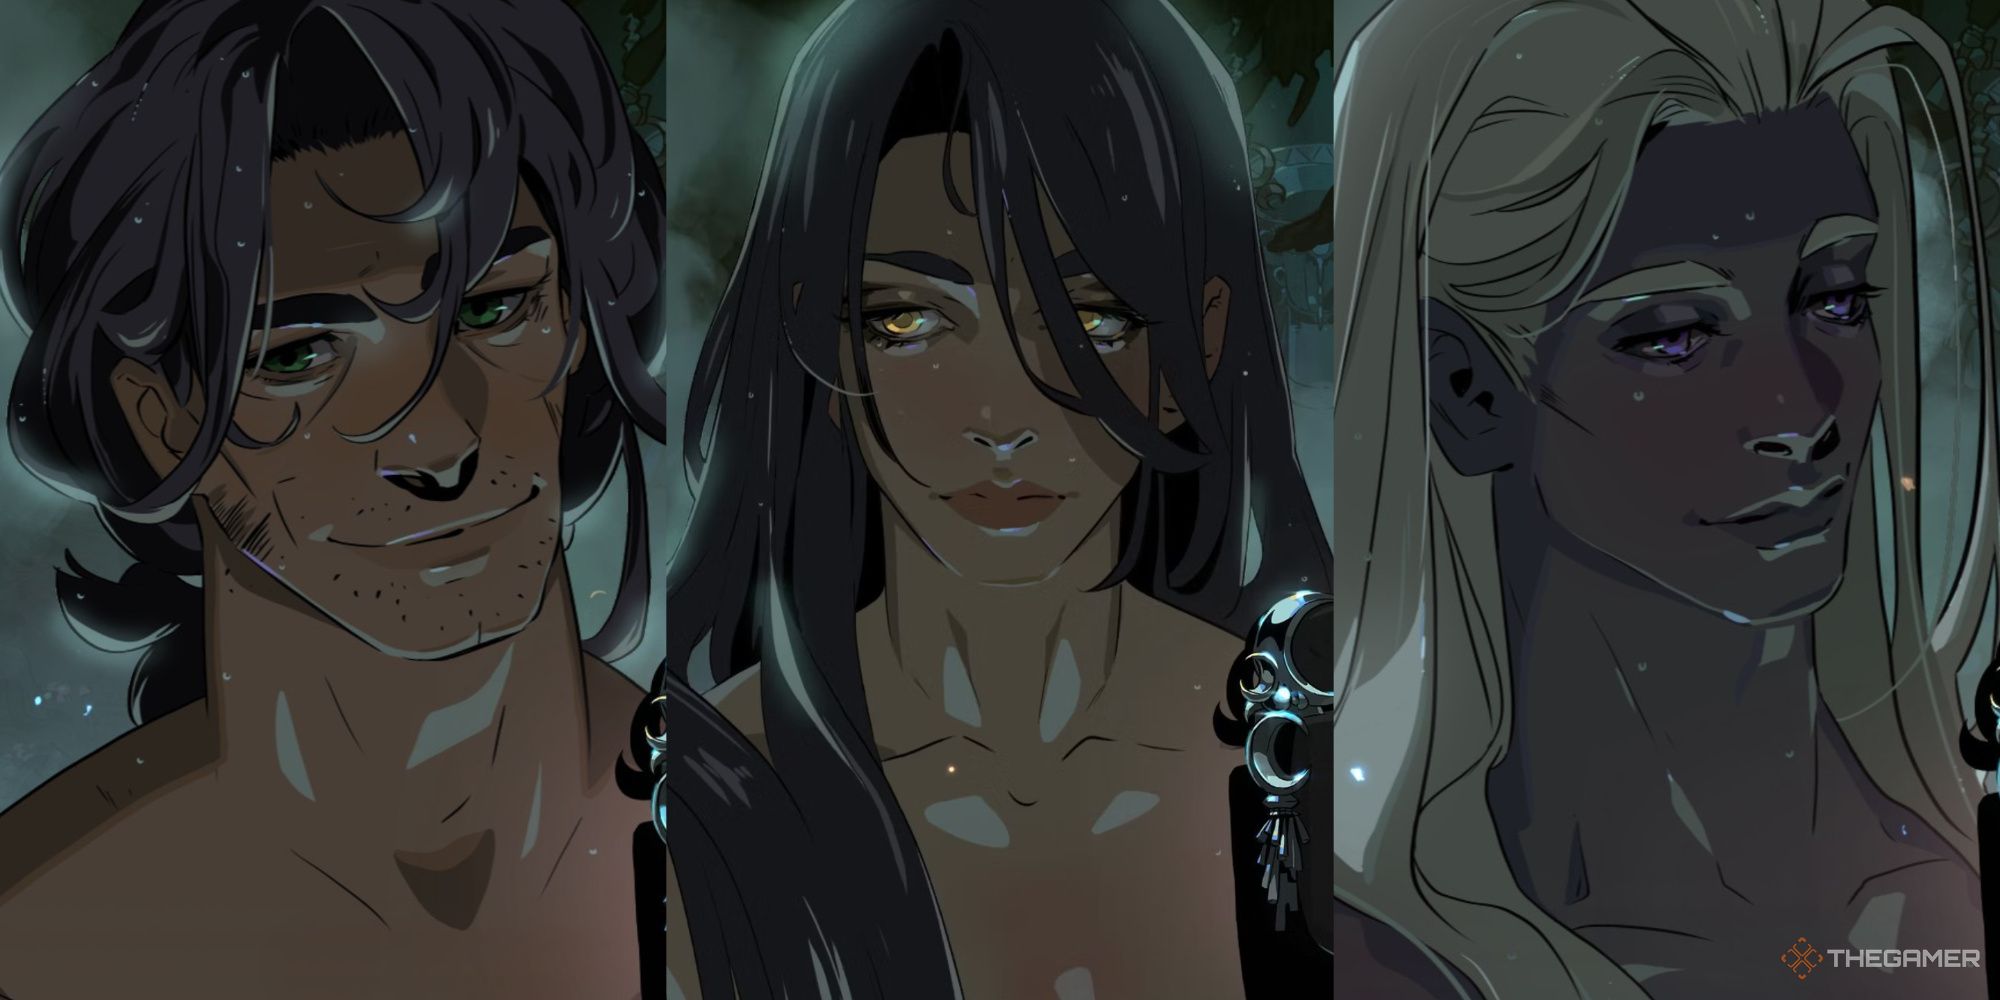 Hades 2 featured image the best romance candidates, featuring Odysseus, Nemesis, and Moros, all of whom are in their hot springs portraits